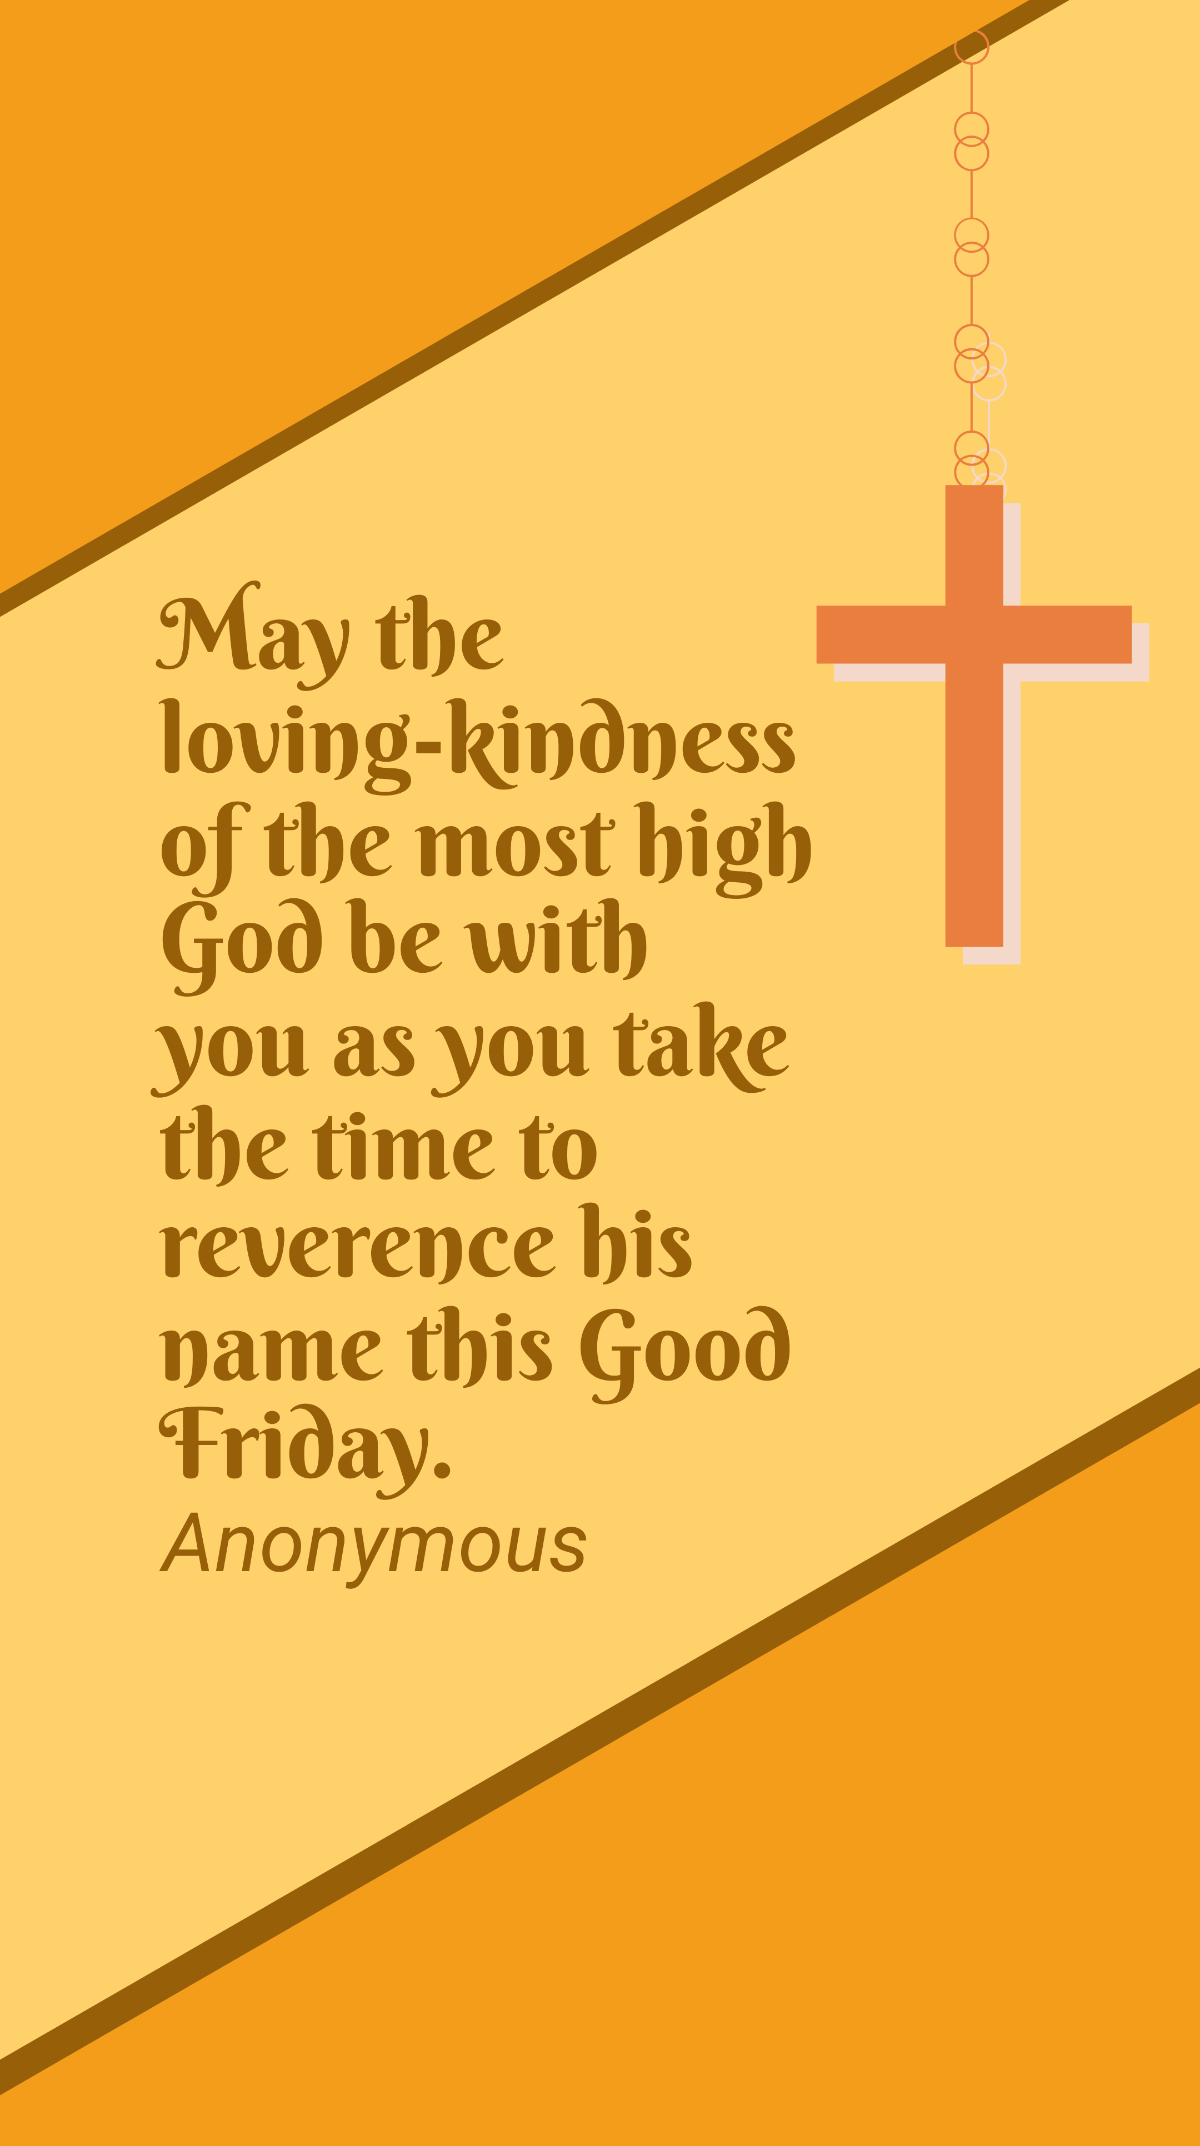 Anonymous - May the loving-kindness of the most high God be with you as you take the time to reverence his name this Good Friday. Template